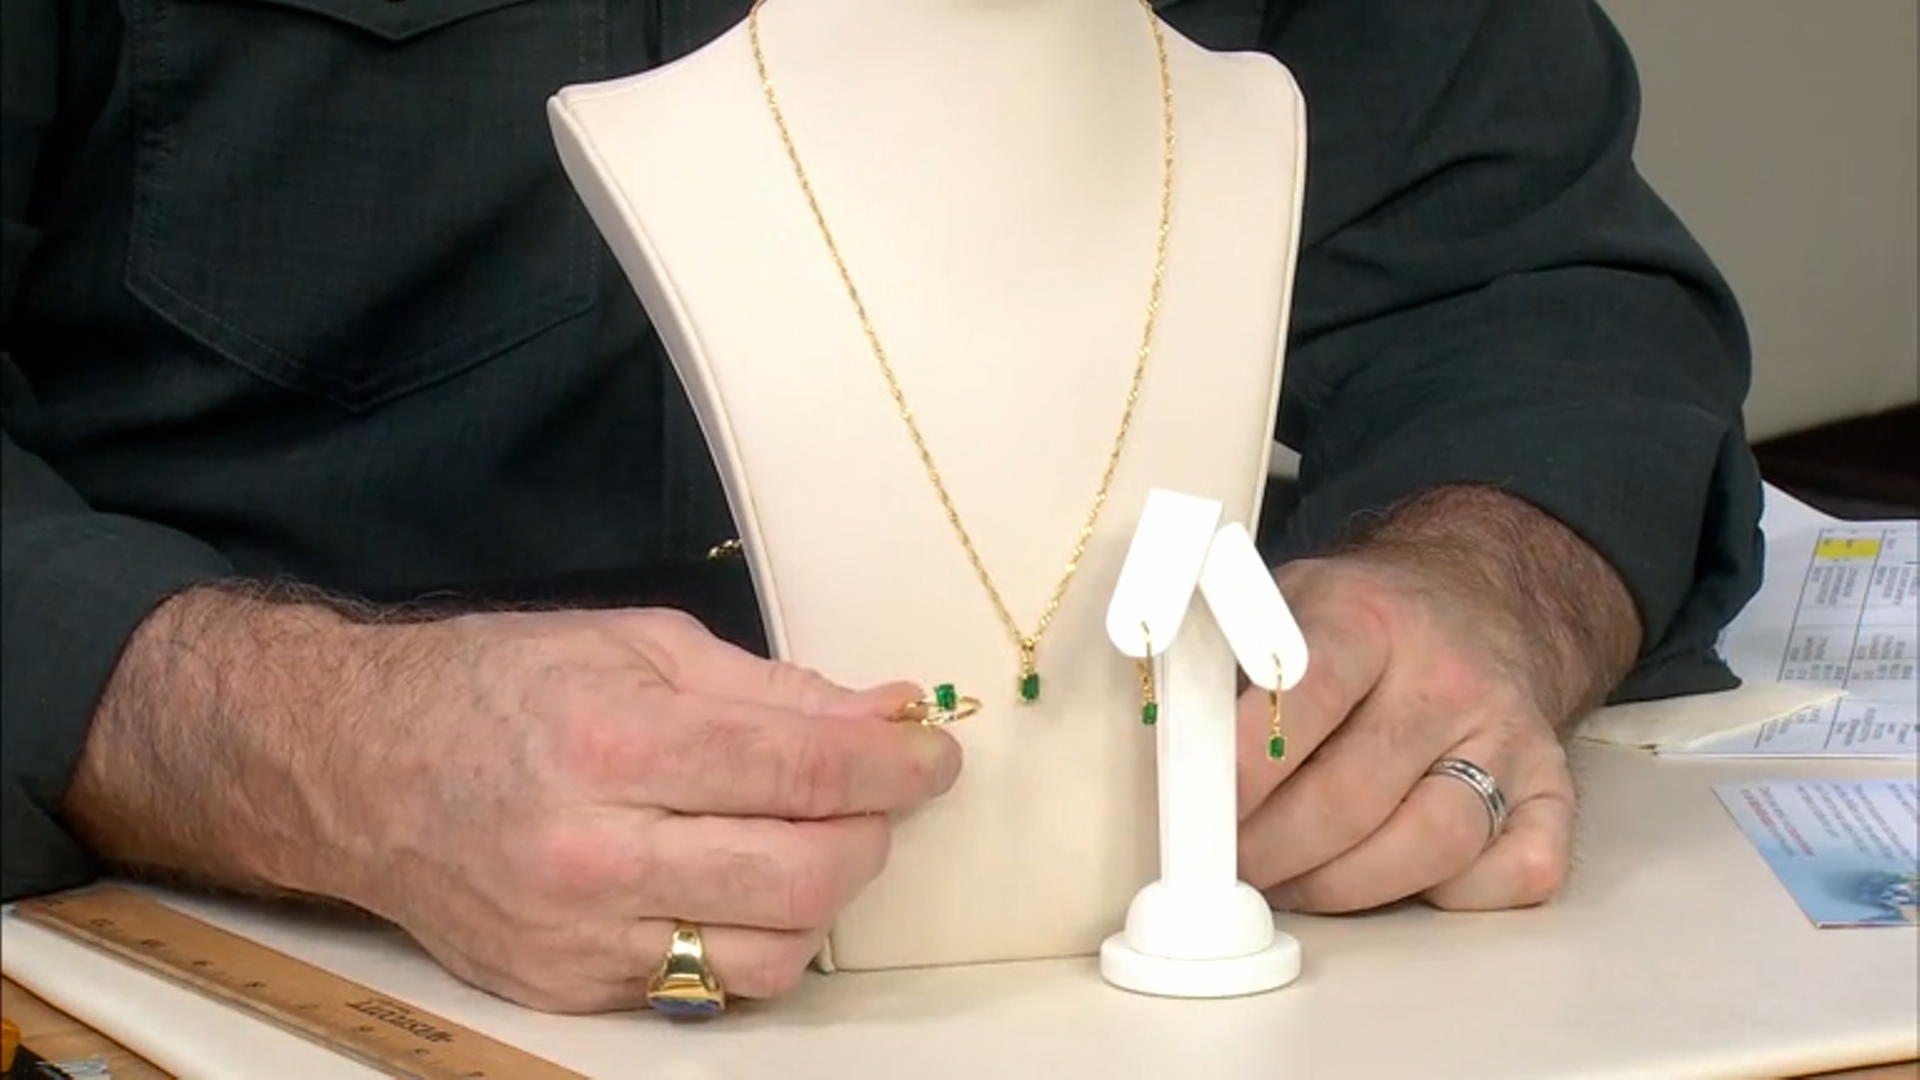 Lab Created Emerald 18K Yellow Gold Over Sterling Silver Jewelry Set 1.24ctw Video Thumbnail